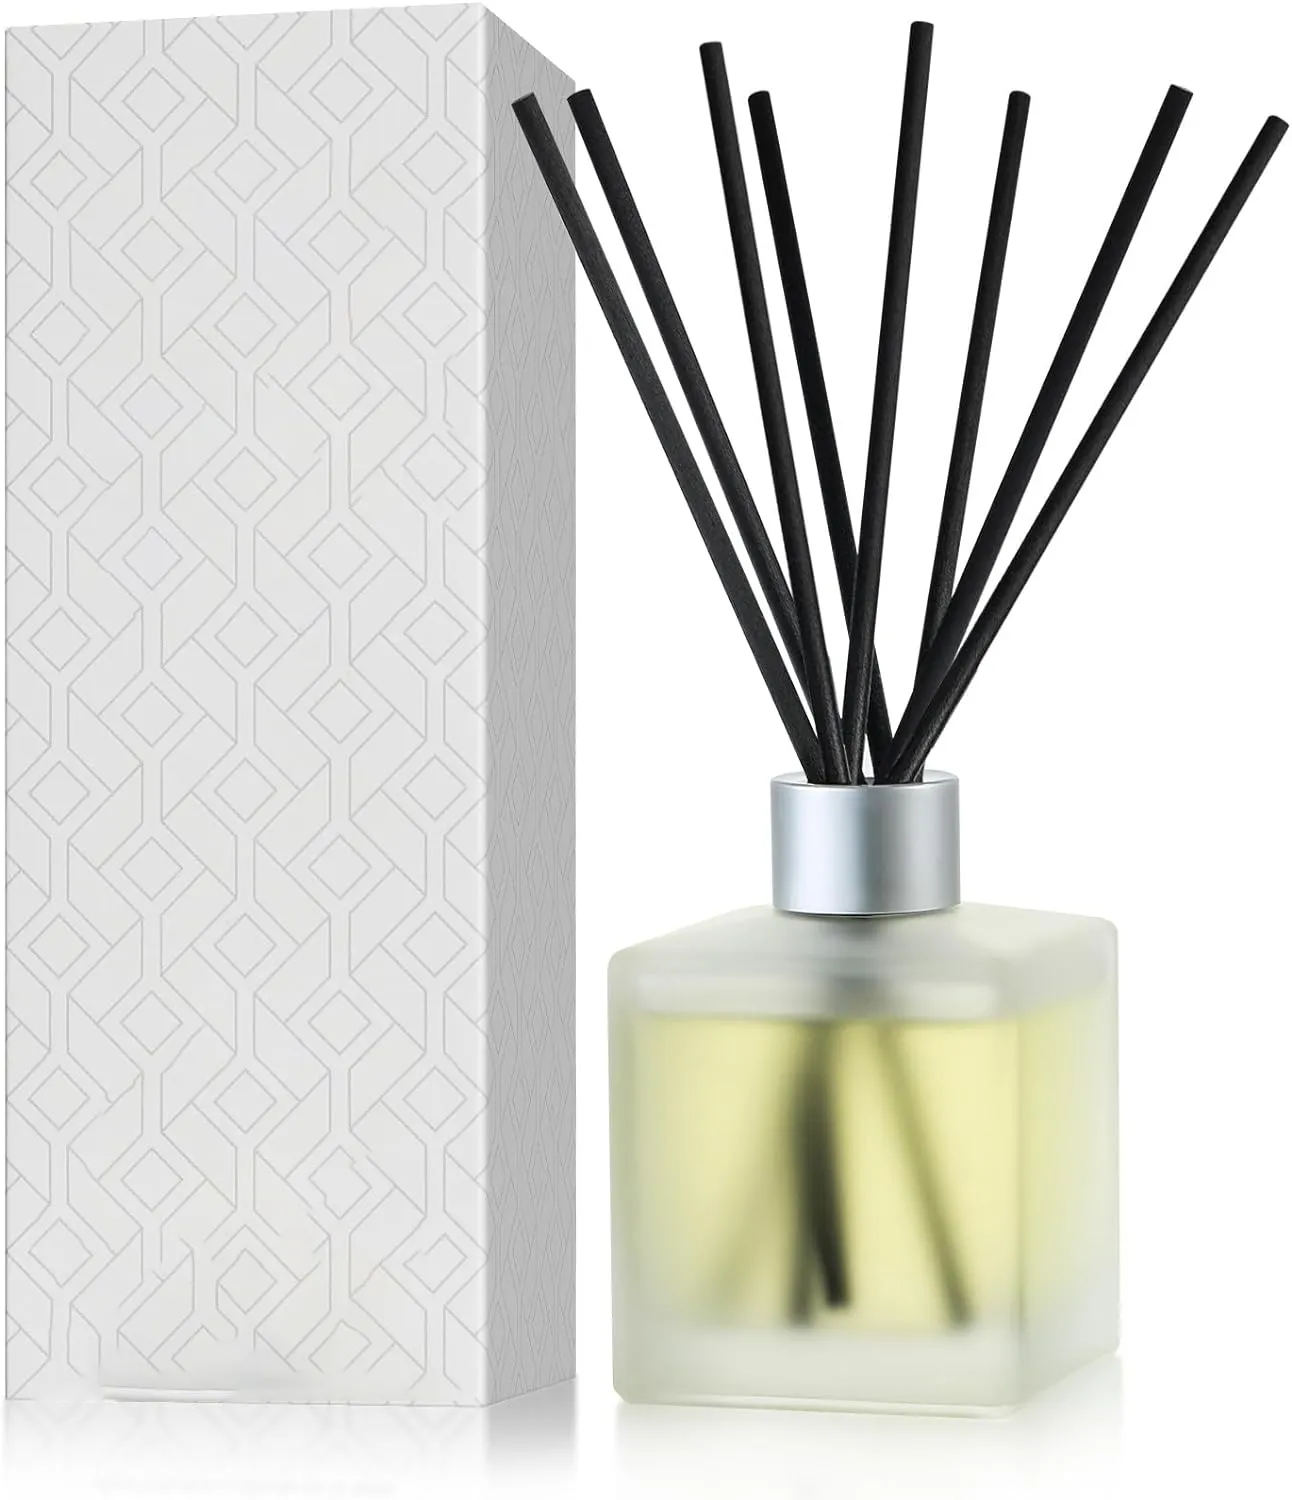 30-200ml reed perfume oud diffuser scented smell diffuser best reed diffusers for large rooms